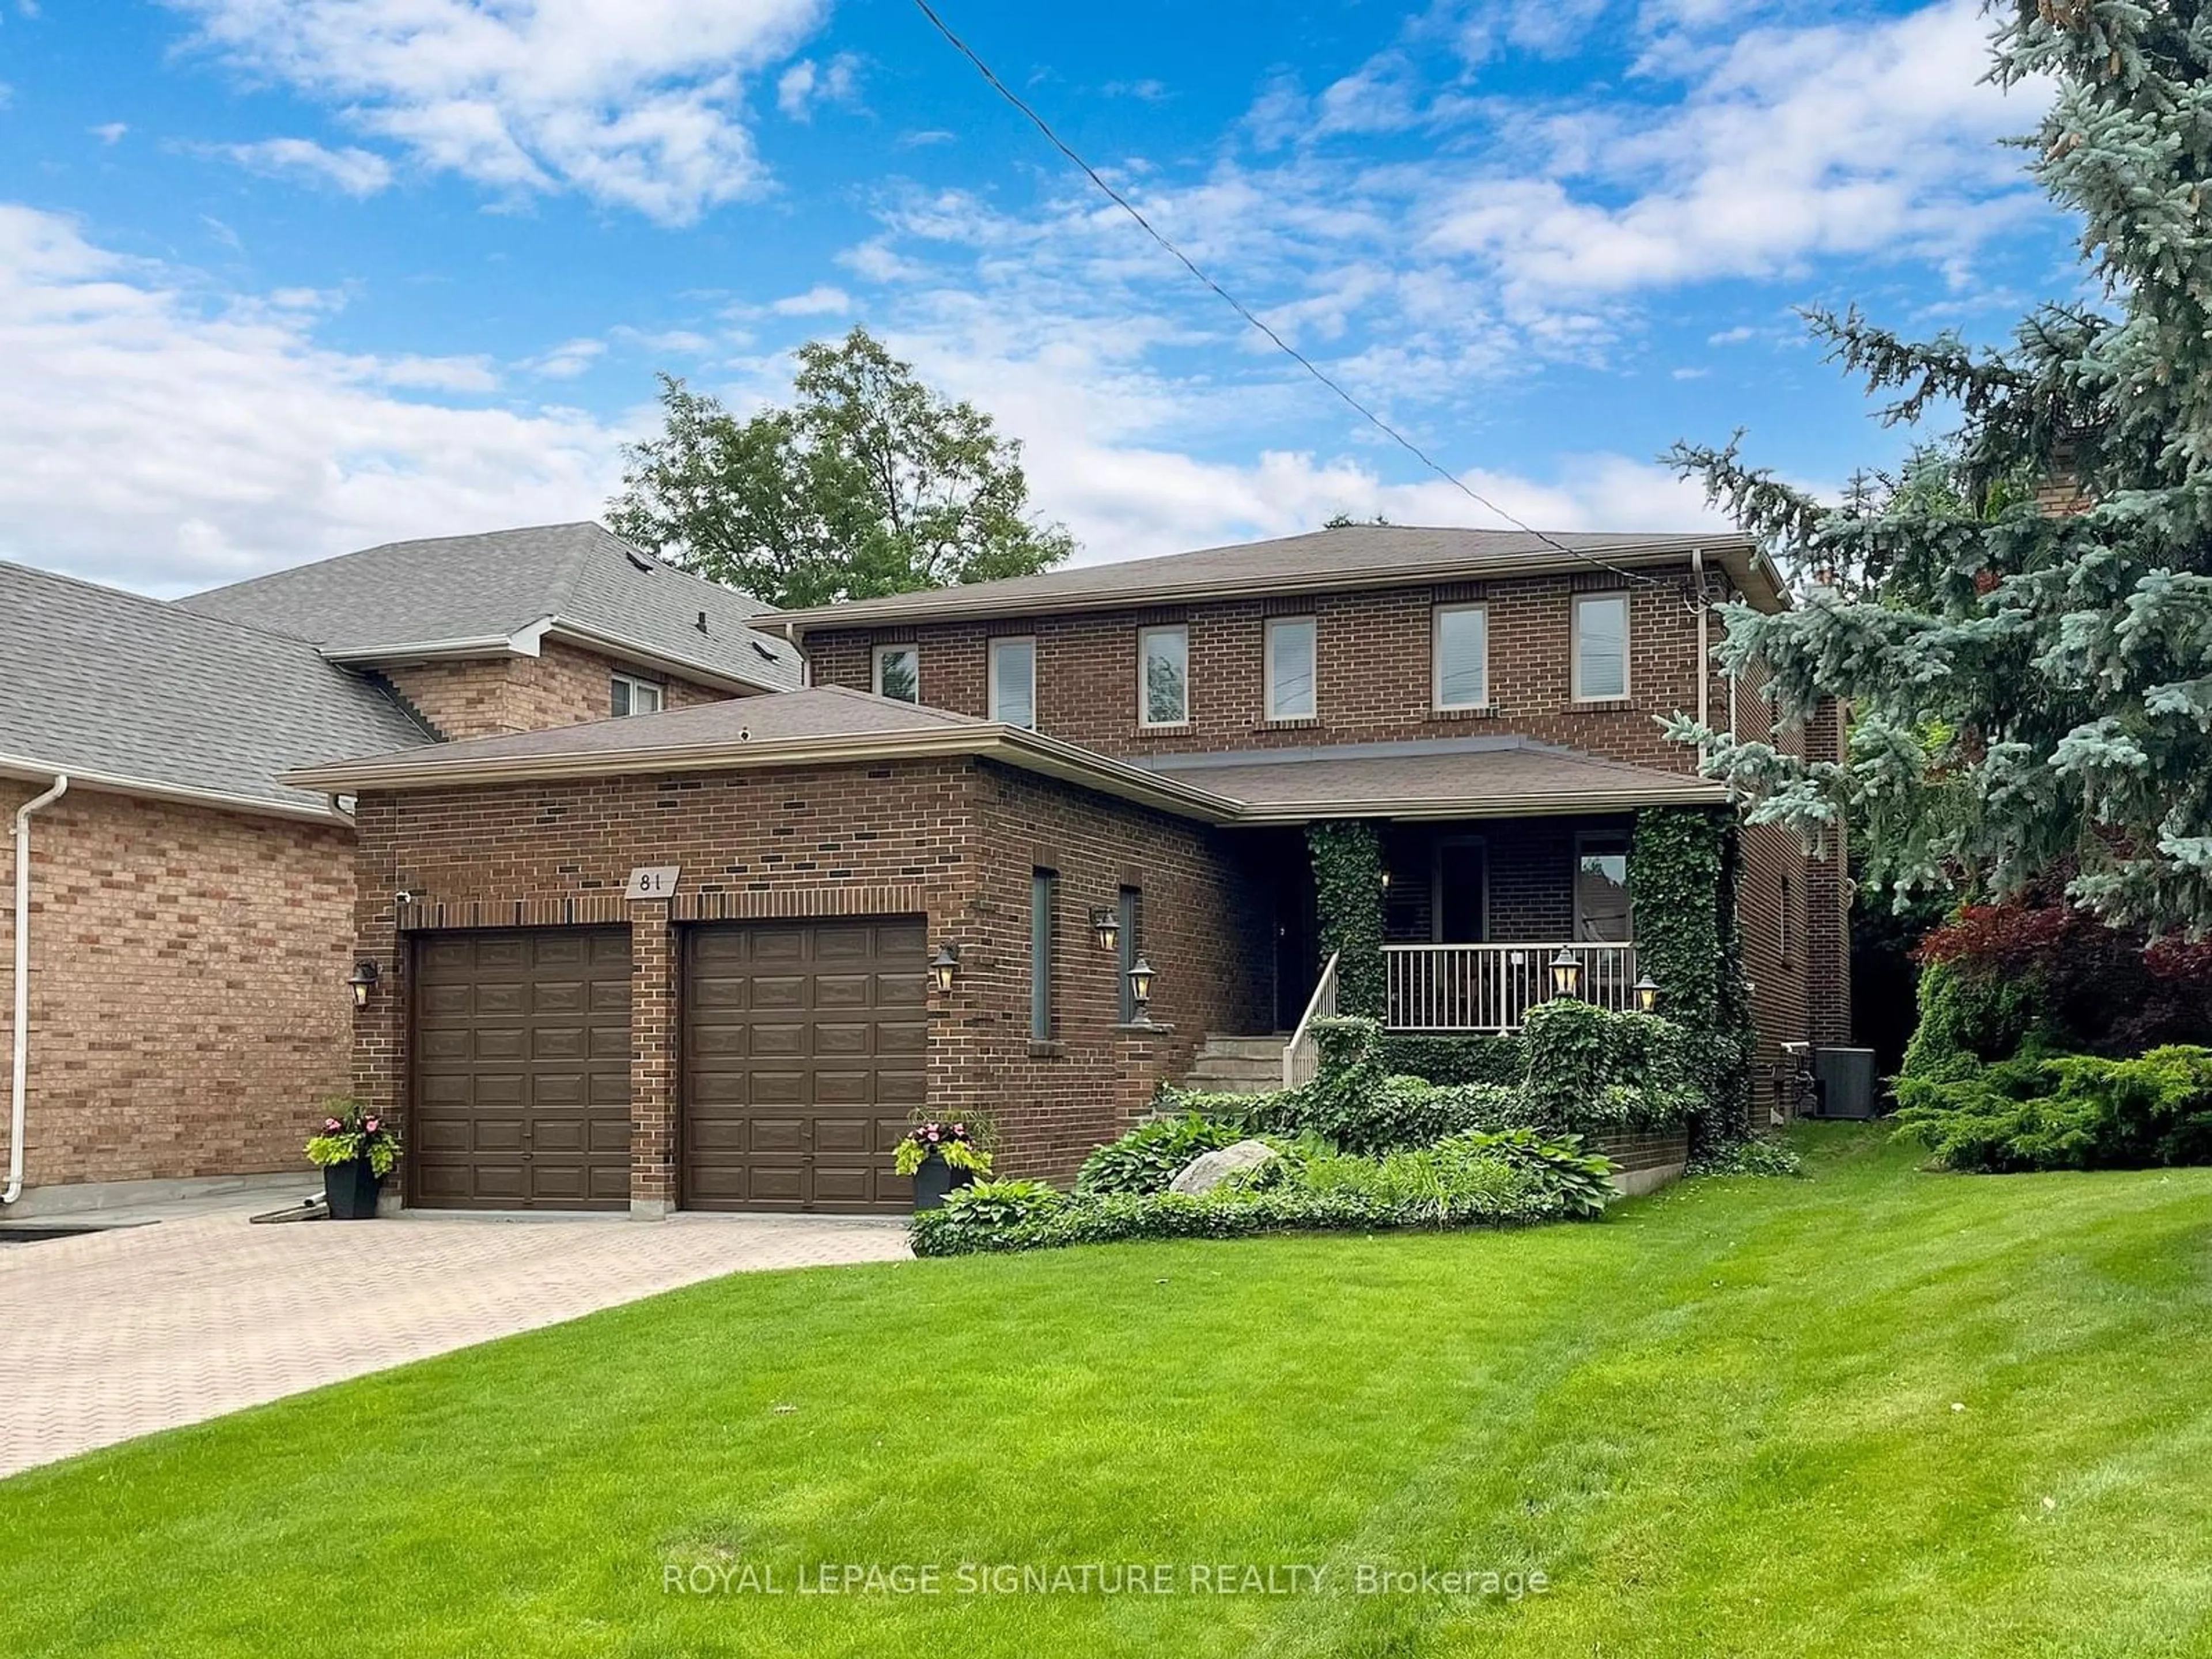 Home with brick exterior material for 81 Garden Ave, Richmond Hill Ontario L4C 6L6